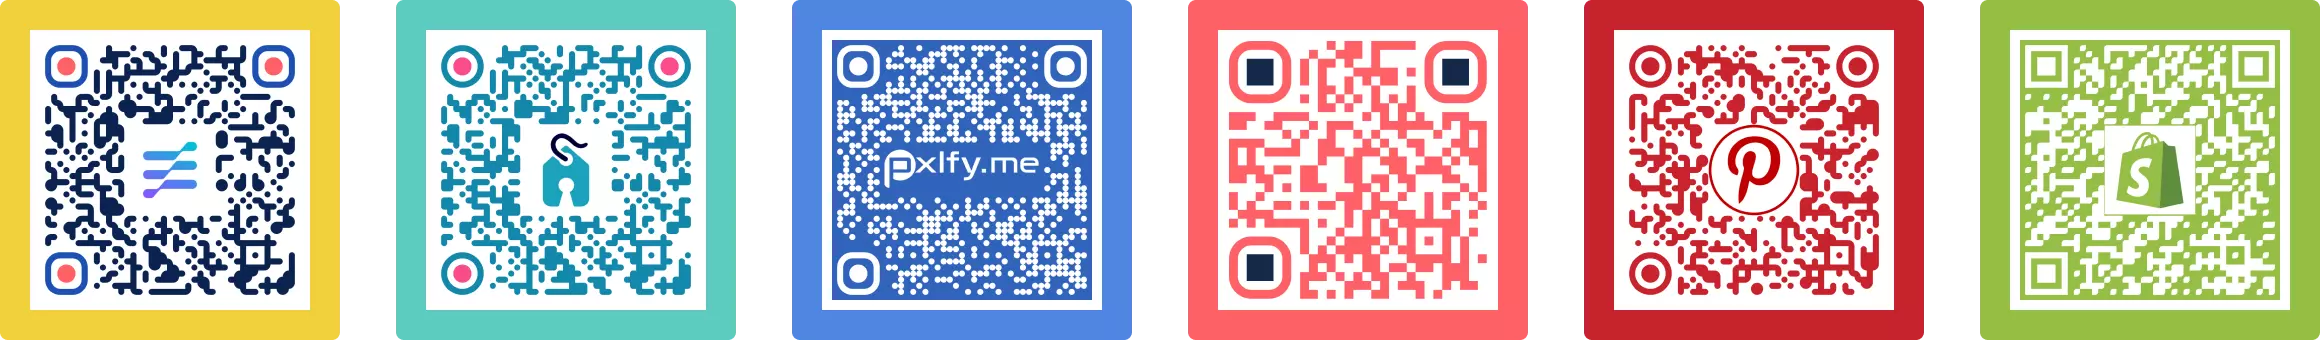 Elite Seller yellow QR code with red dots